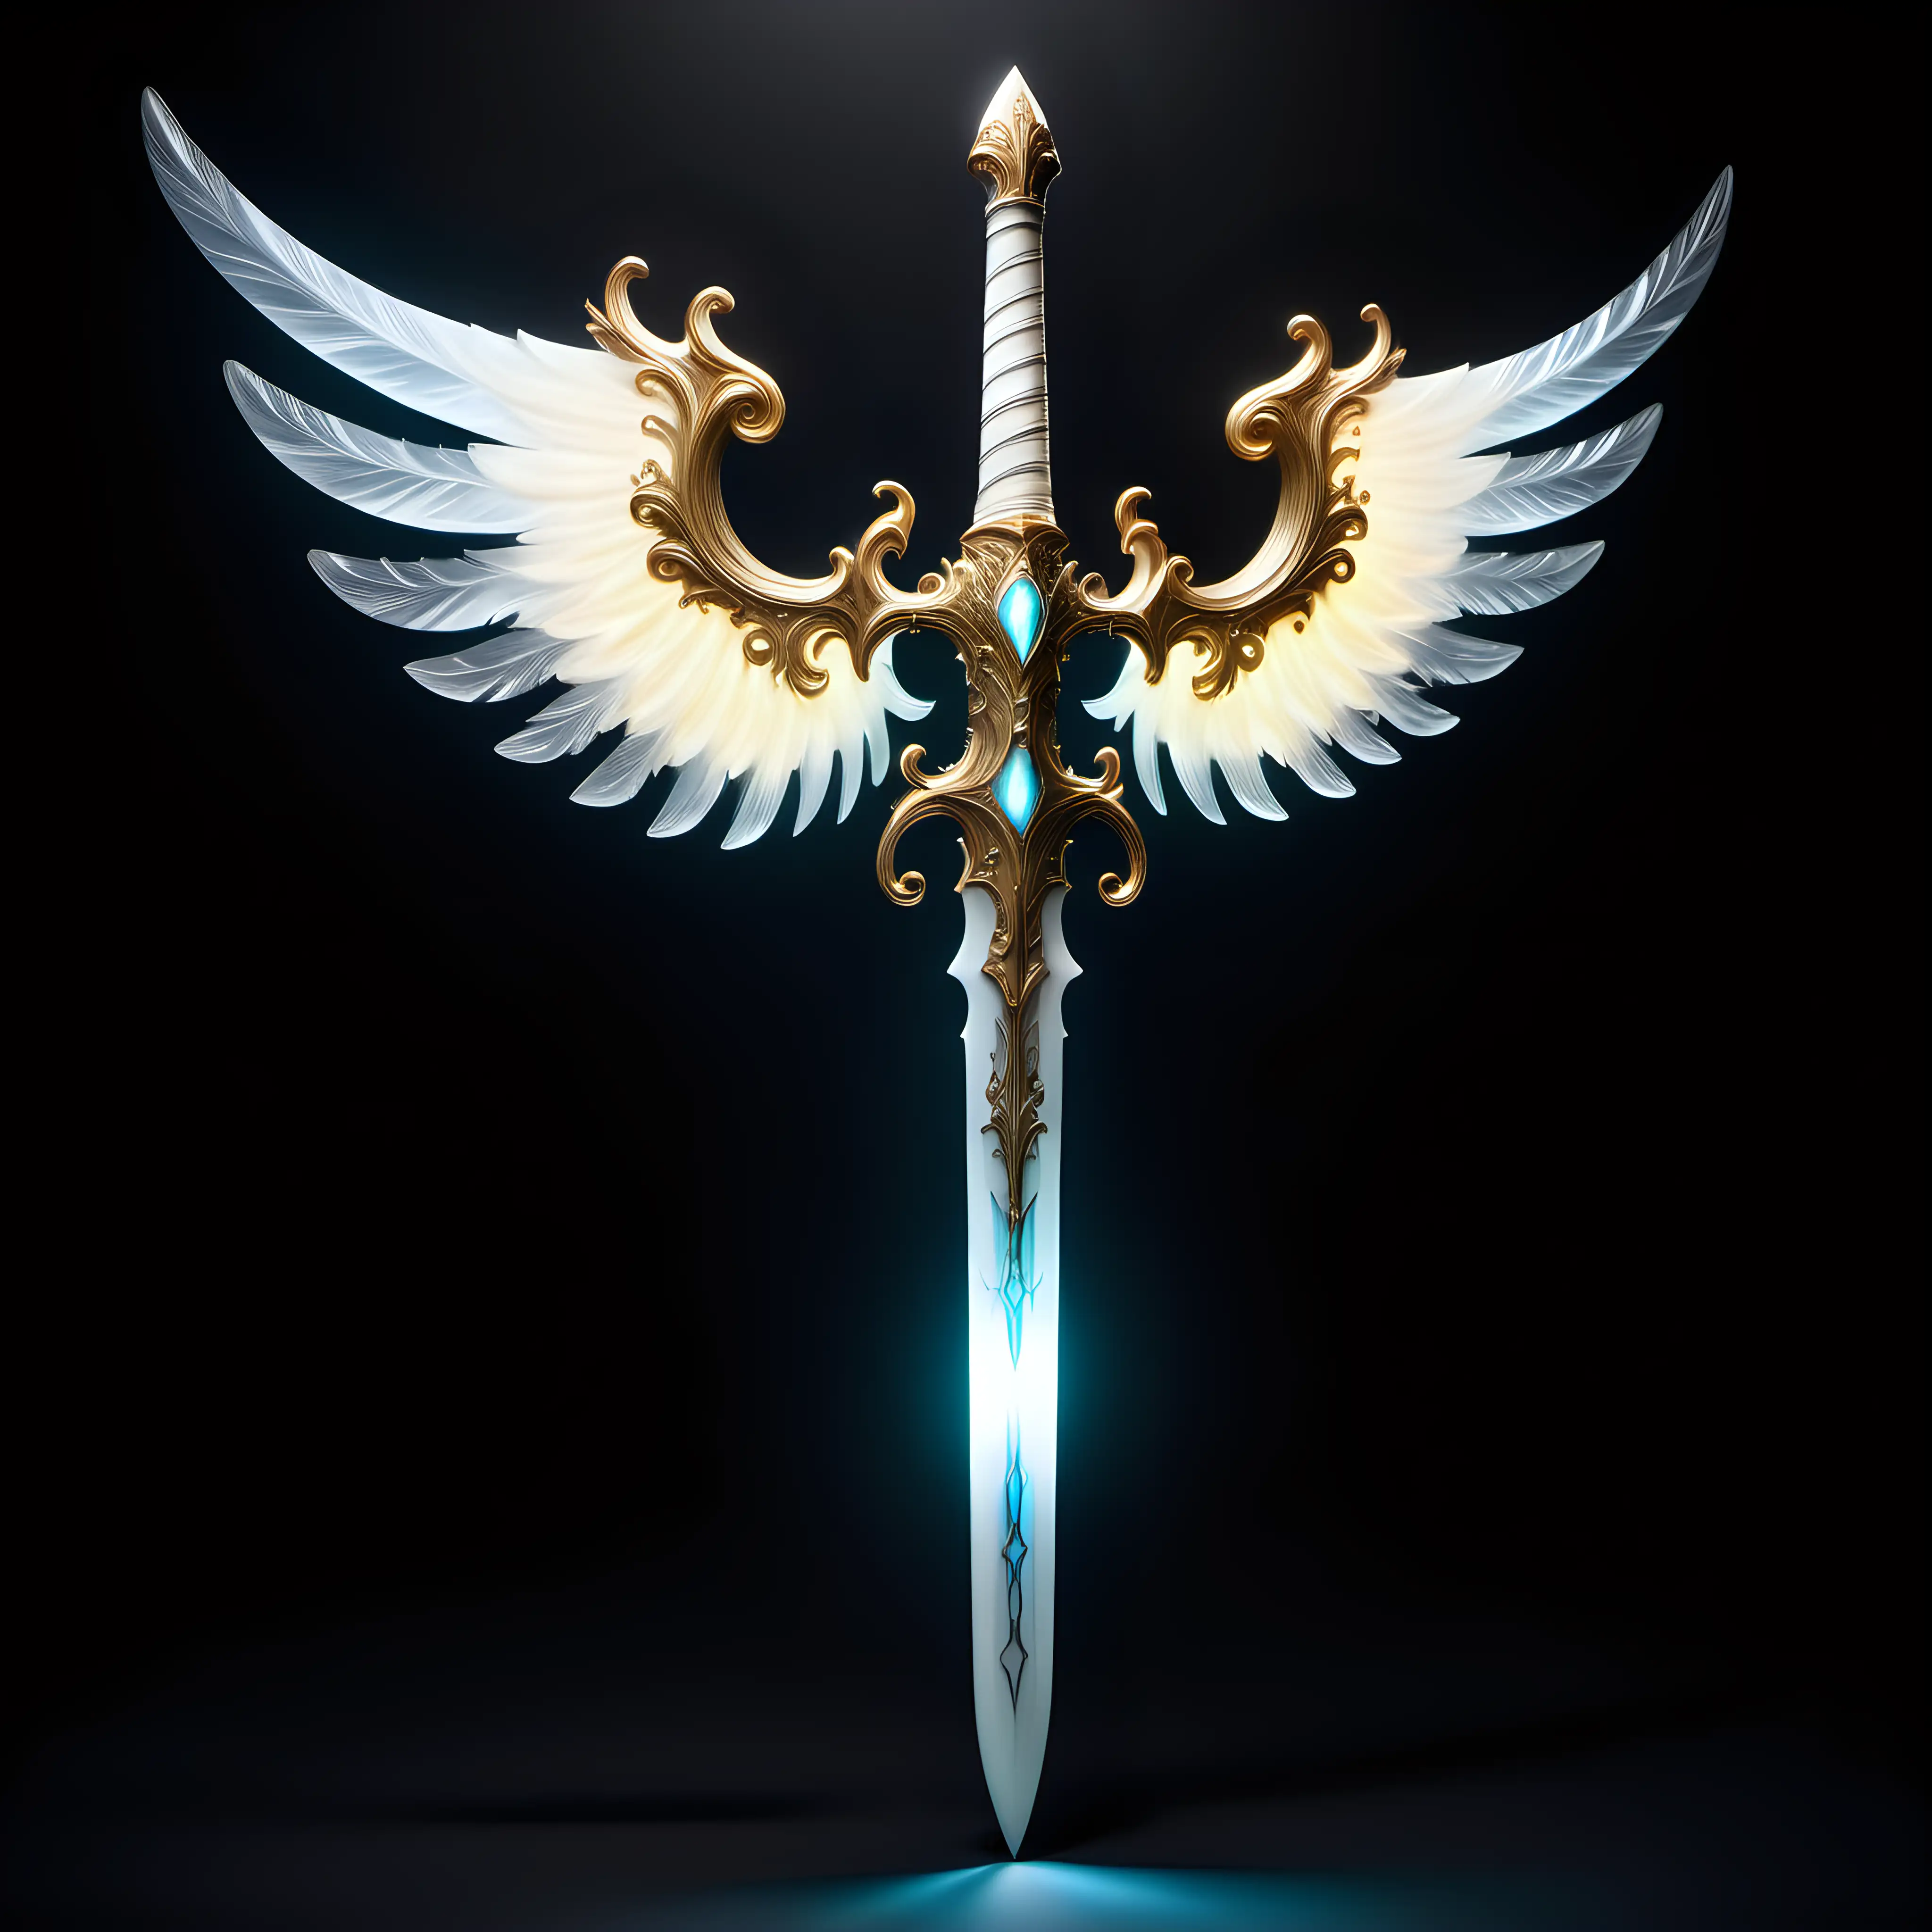 Radiant Alabaster Sword with Golden Streaks and Winged Guard